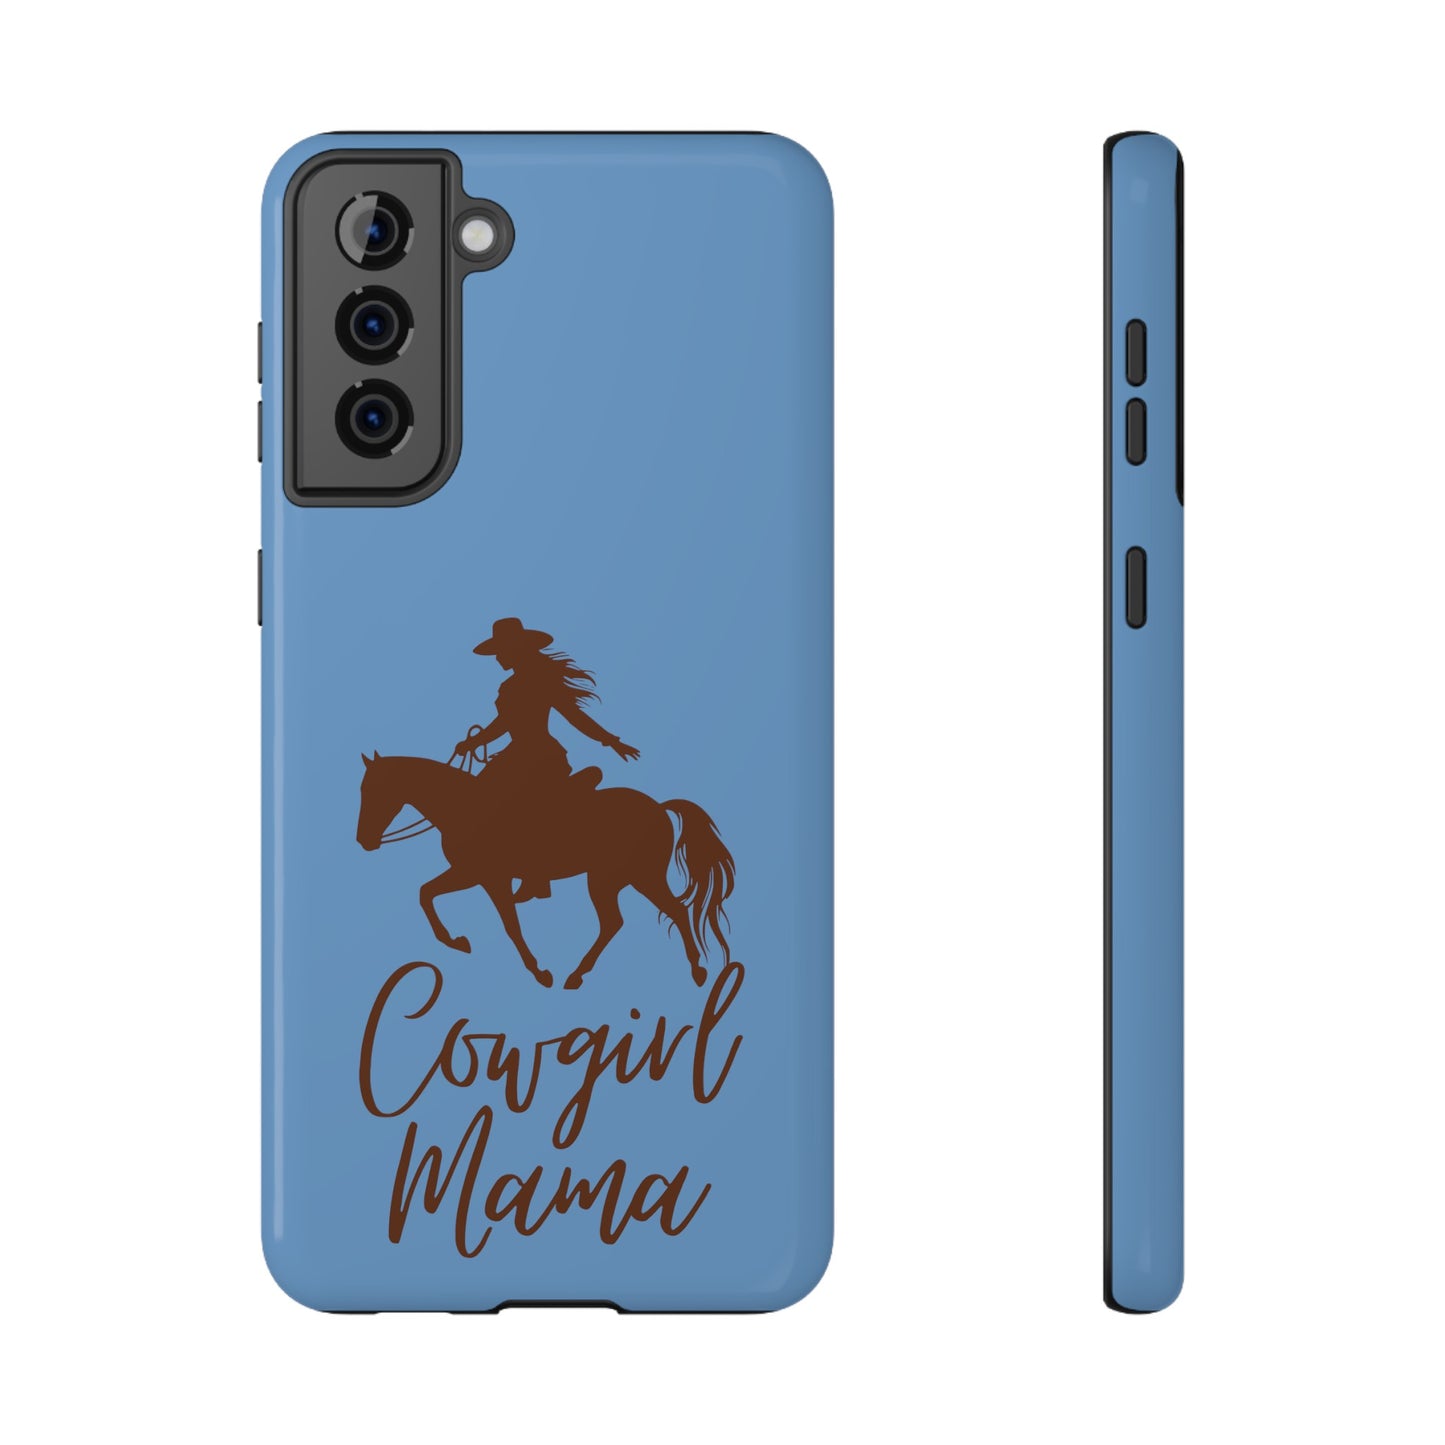 Cowgirl Mama Samsung Impact-Resistant Cases